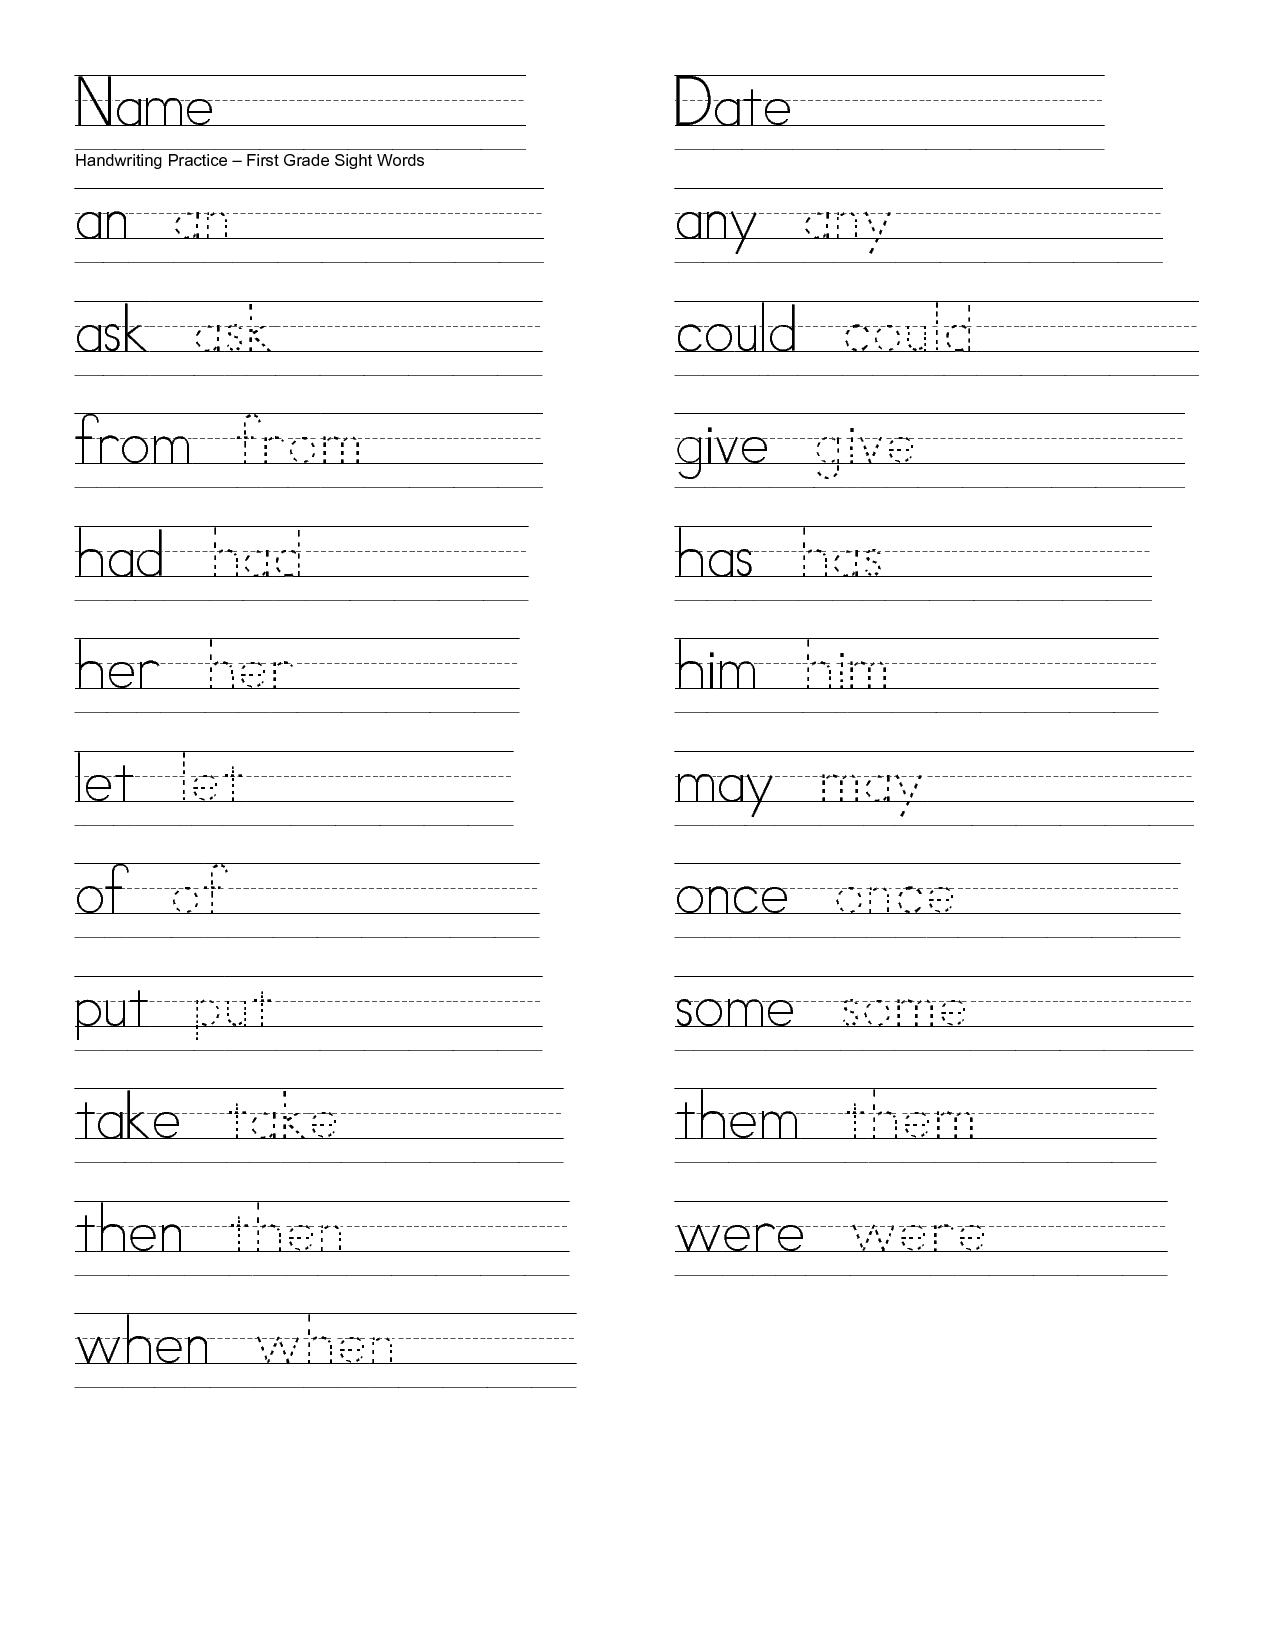 First Grade Sight Words Printable | First Grade Sight Words | Free Printable First Grade Sight Words Worksheets